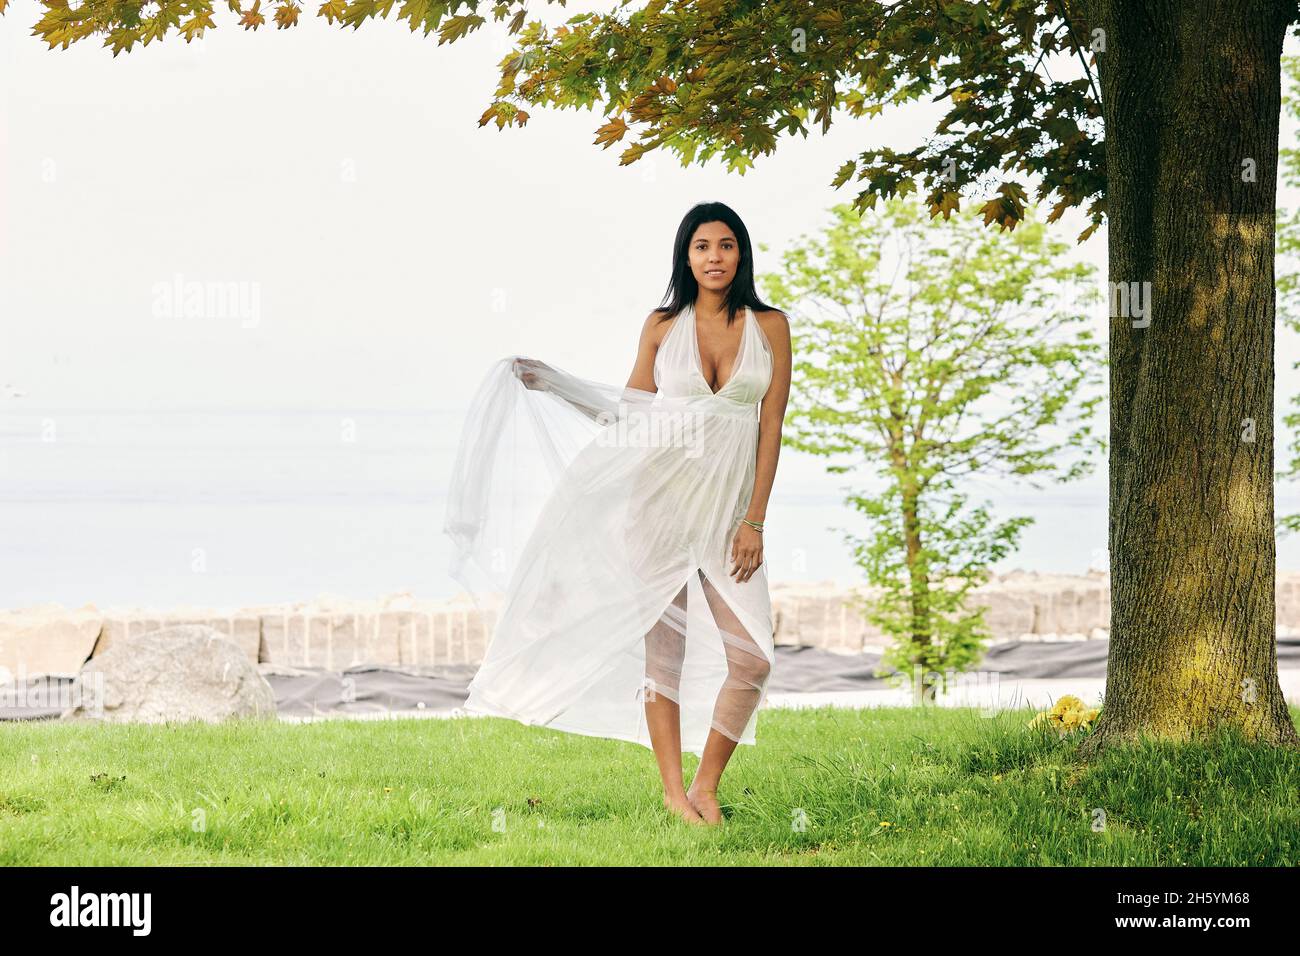 Strolling amidst nature's beauty: A Latina woman relishes her walk by the lake Stock Photo